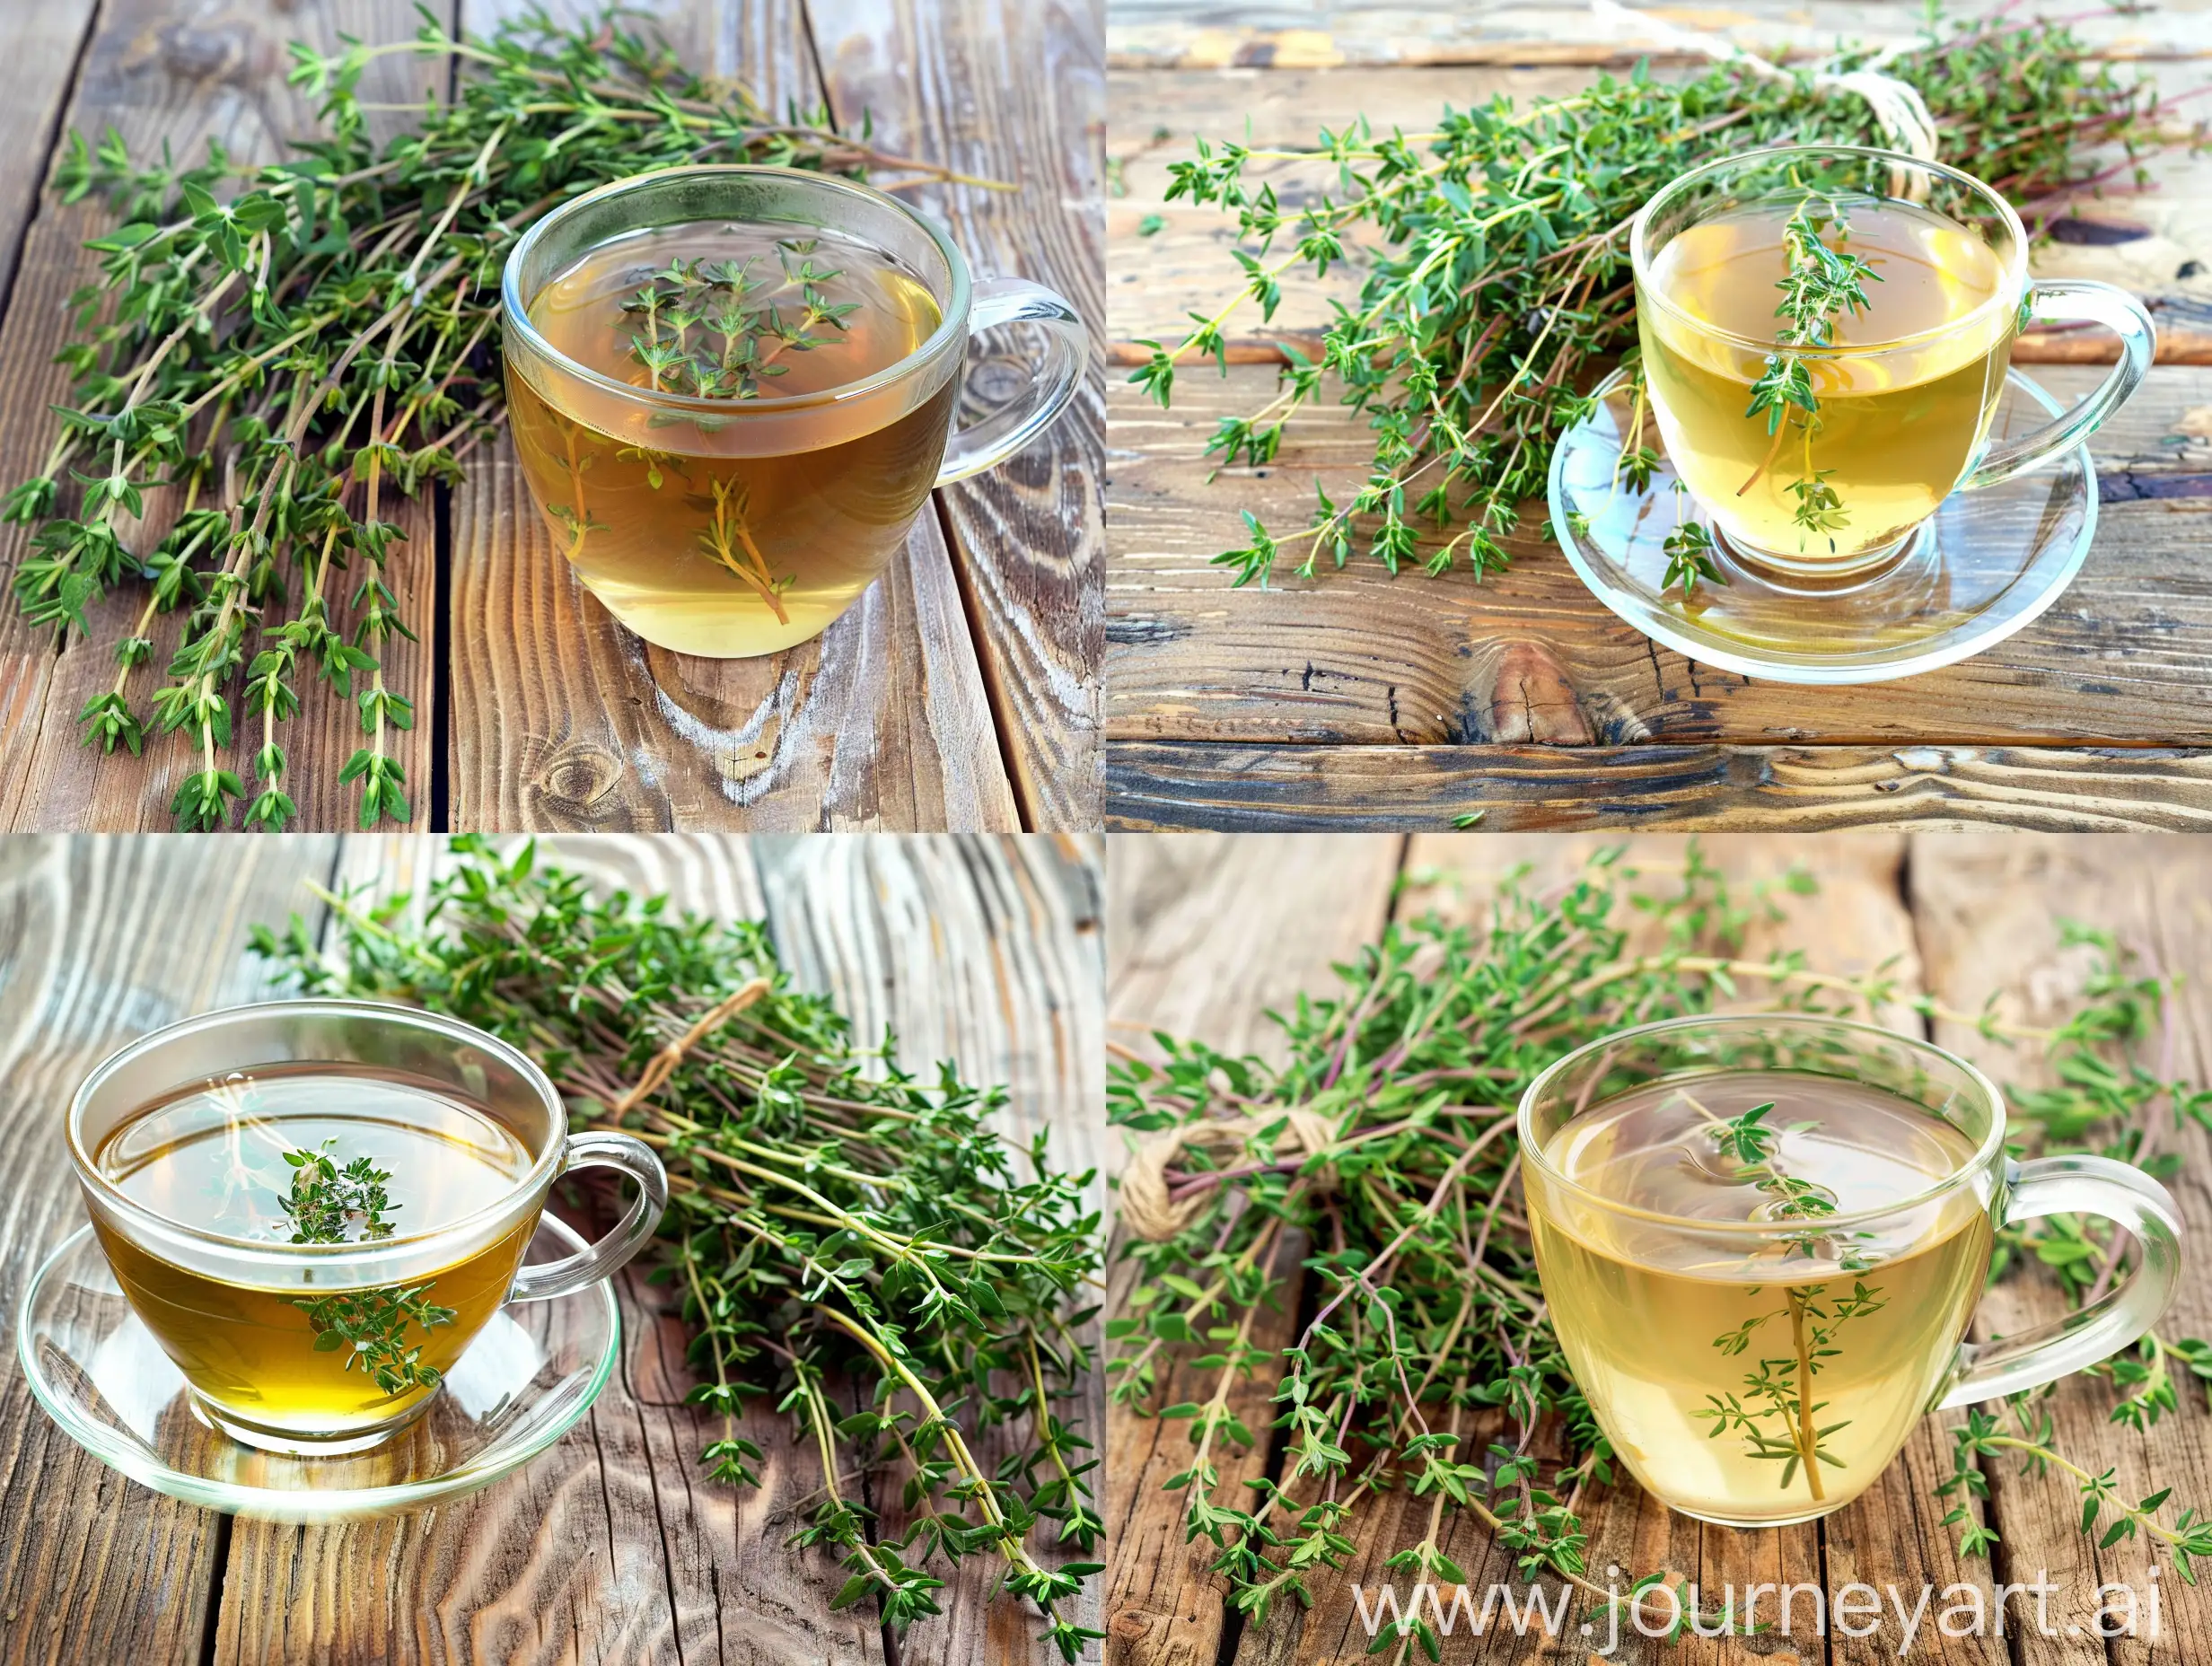 Photo of a cup of thyme tea on a wooden table with a bunch of thyme plants